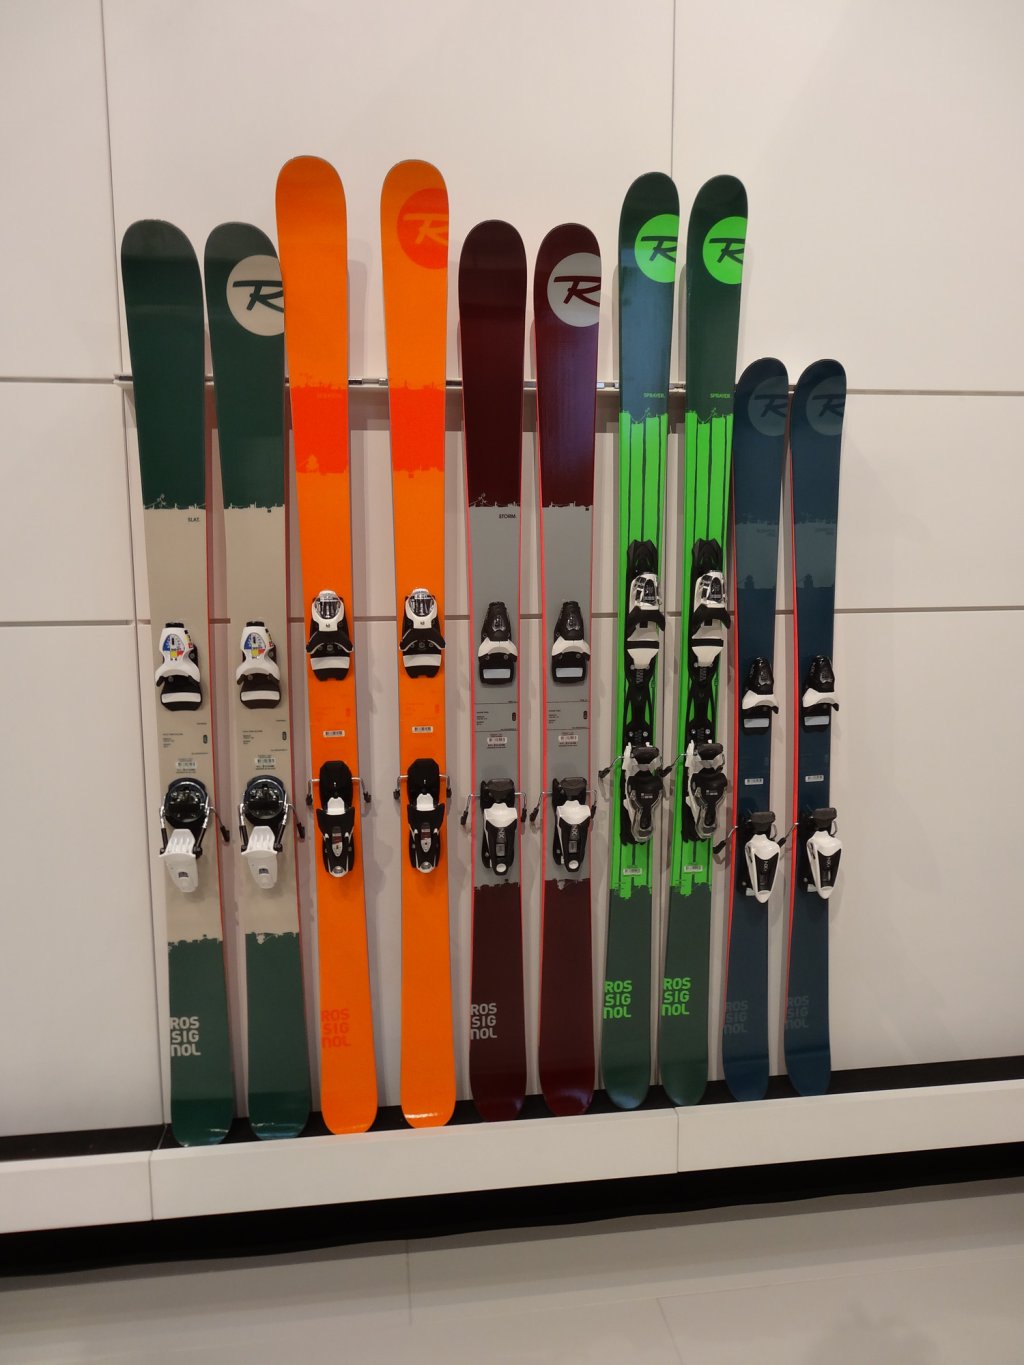 Rossignol freestyle/park skis, a wider model is only available in North America